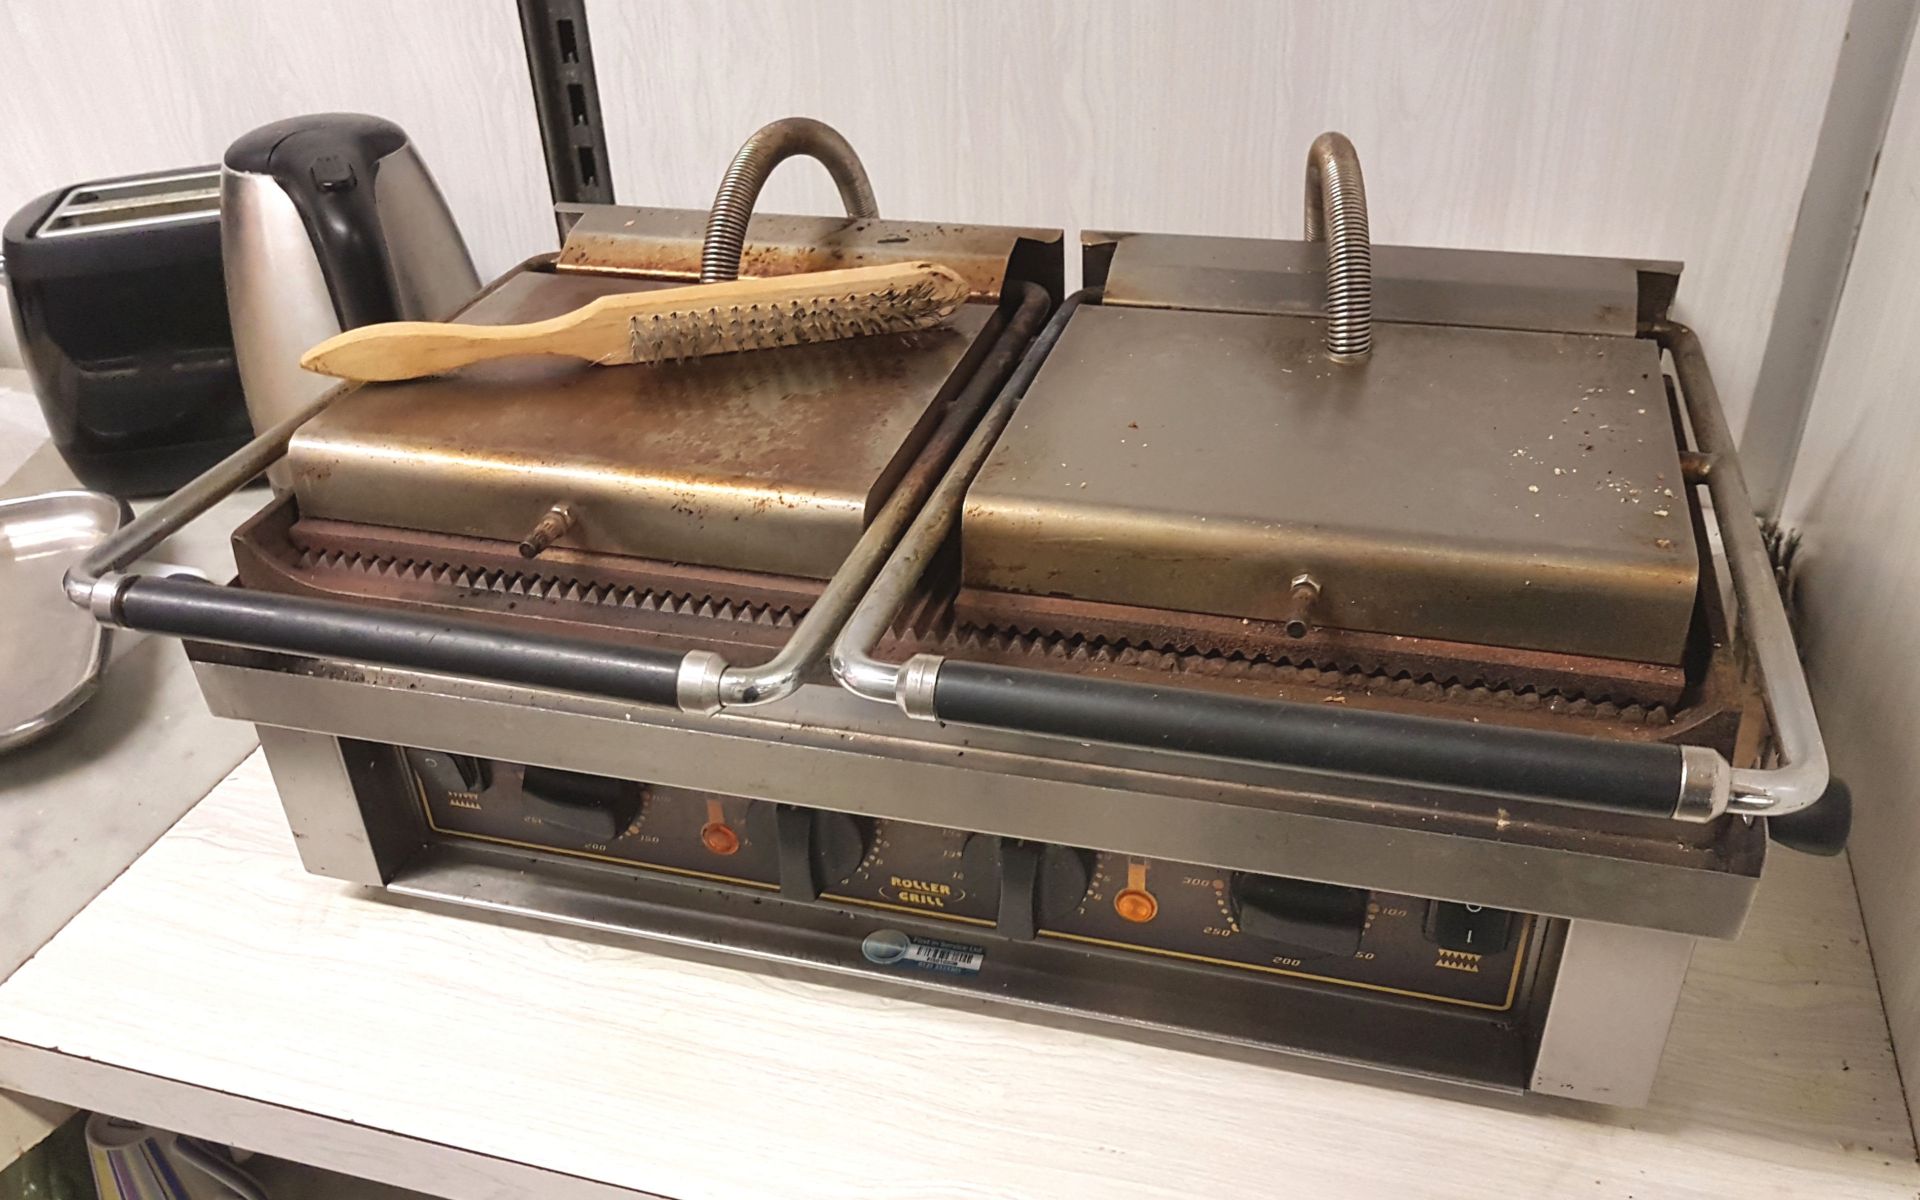 1 x Roller Grill - Dimensions: 56 x 39 x H20cm - Ref: SIN018 - CL278 - From A Recently Closed - Image 4 of 7